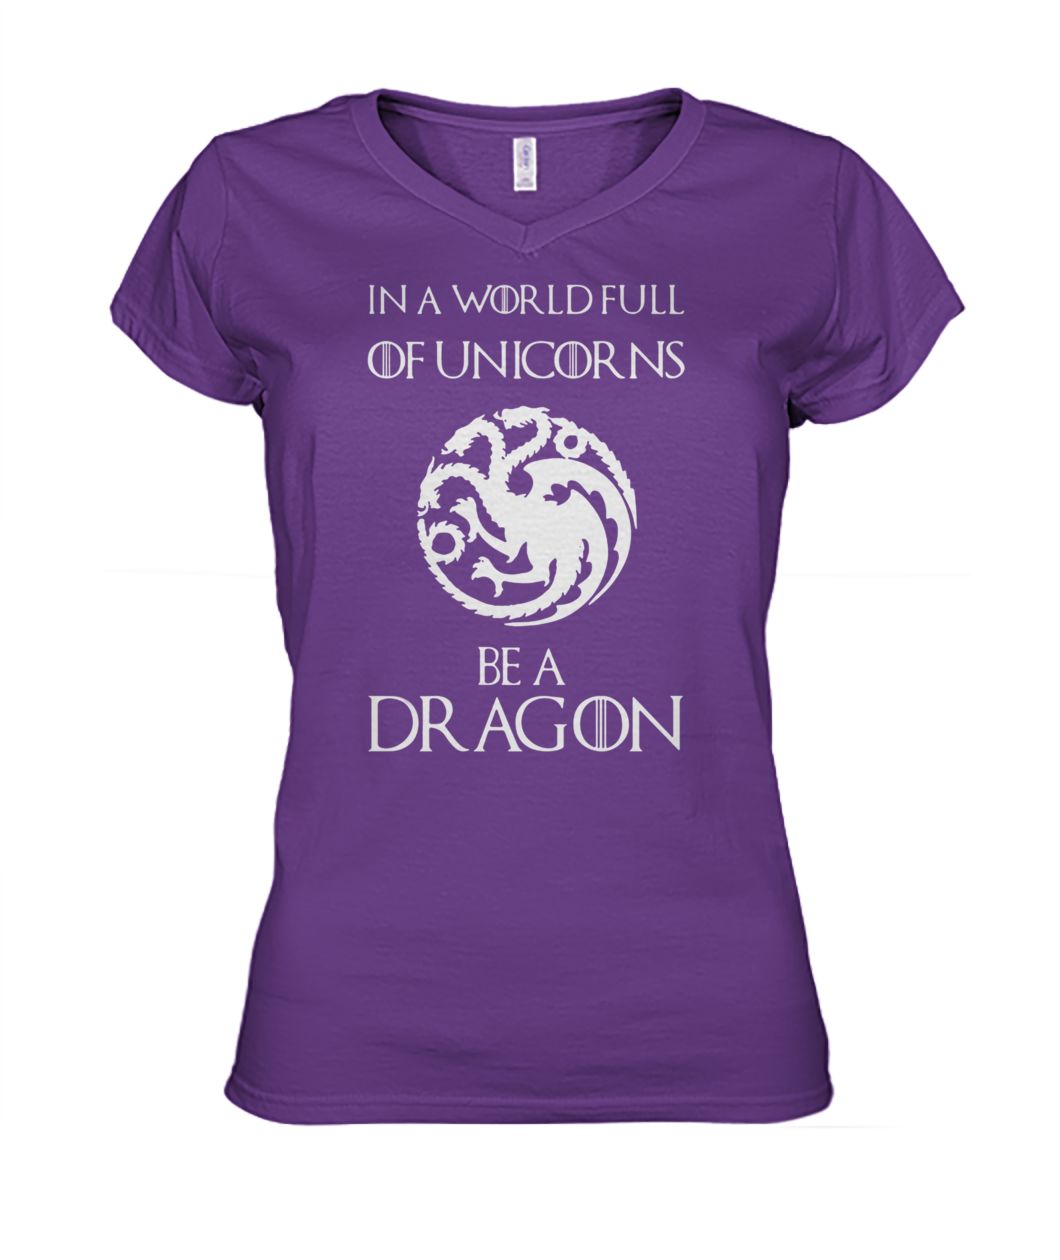 Game of thrones in a world full of unicorns be a dragon women's v-neck